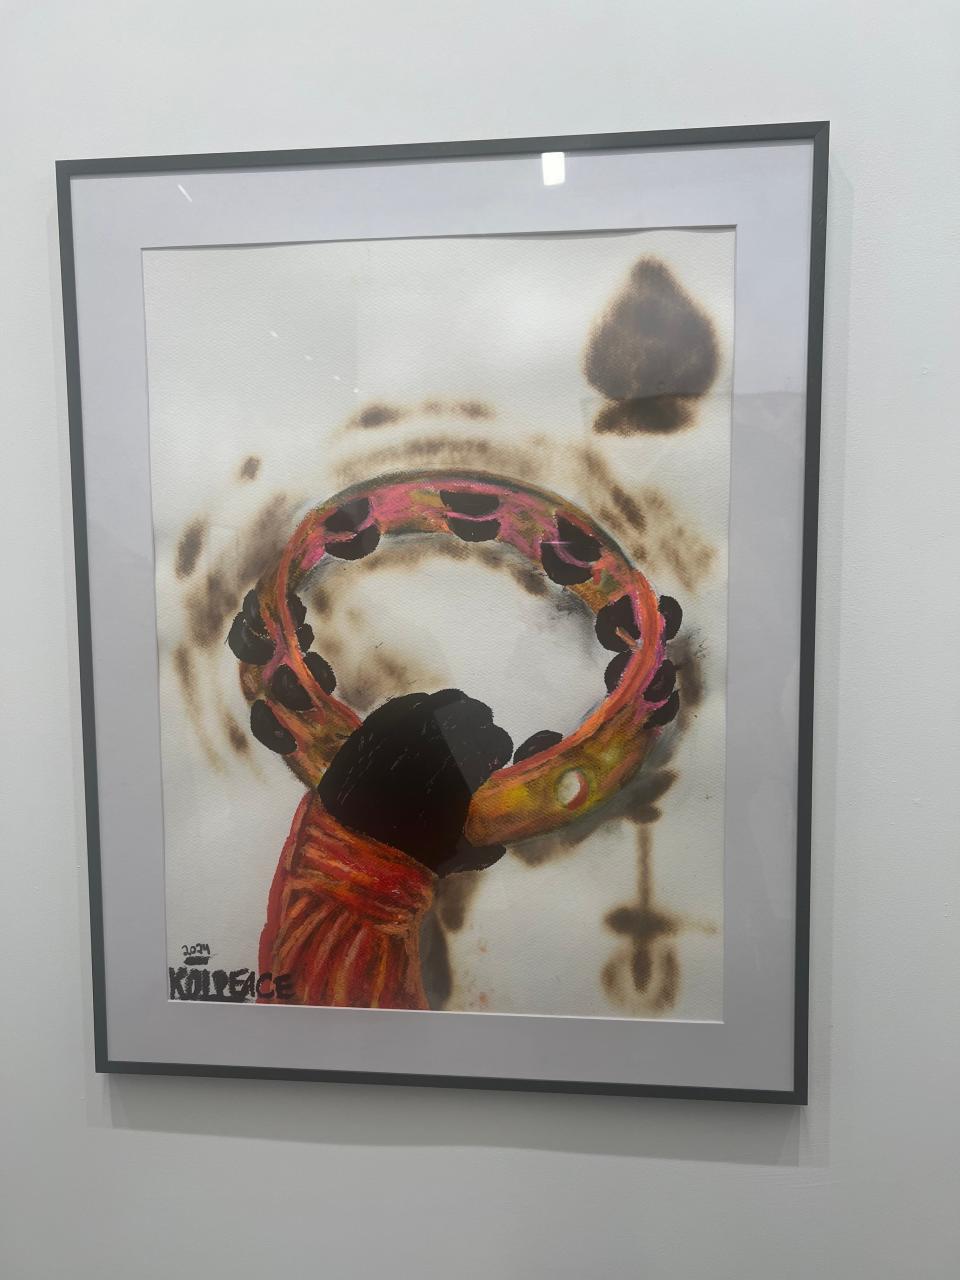 Framed artwork featuring an abstract circular design, possibly suggesting travel themes. Artist's signature in the corner